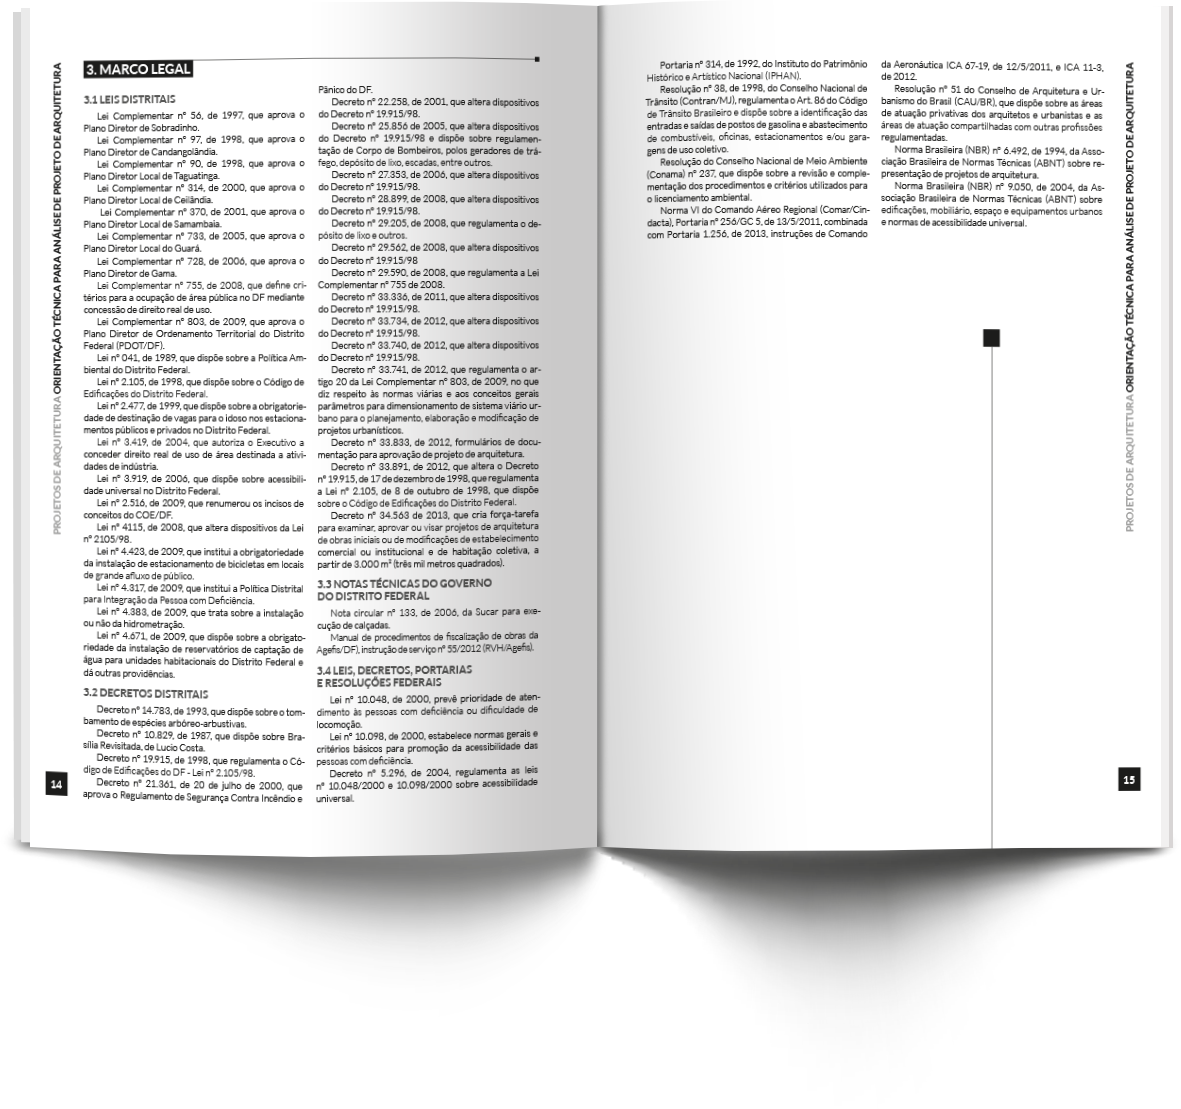 book black and White b&w legal documentation guidelines Charts fluxogram graphic editorial arch 3D cover